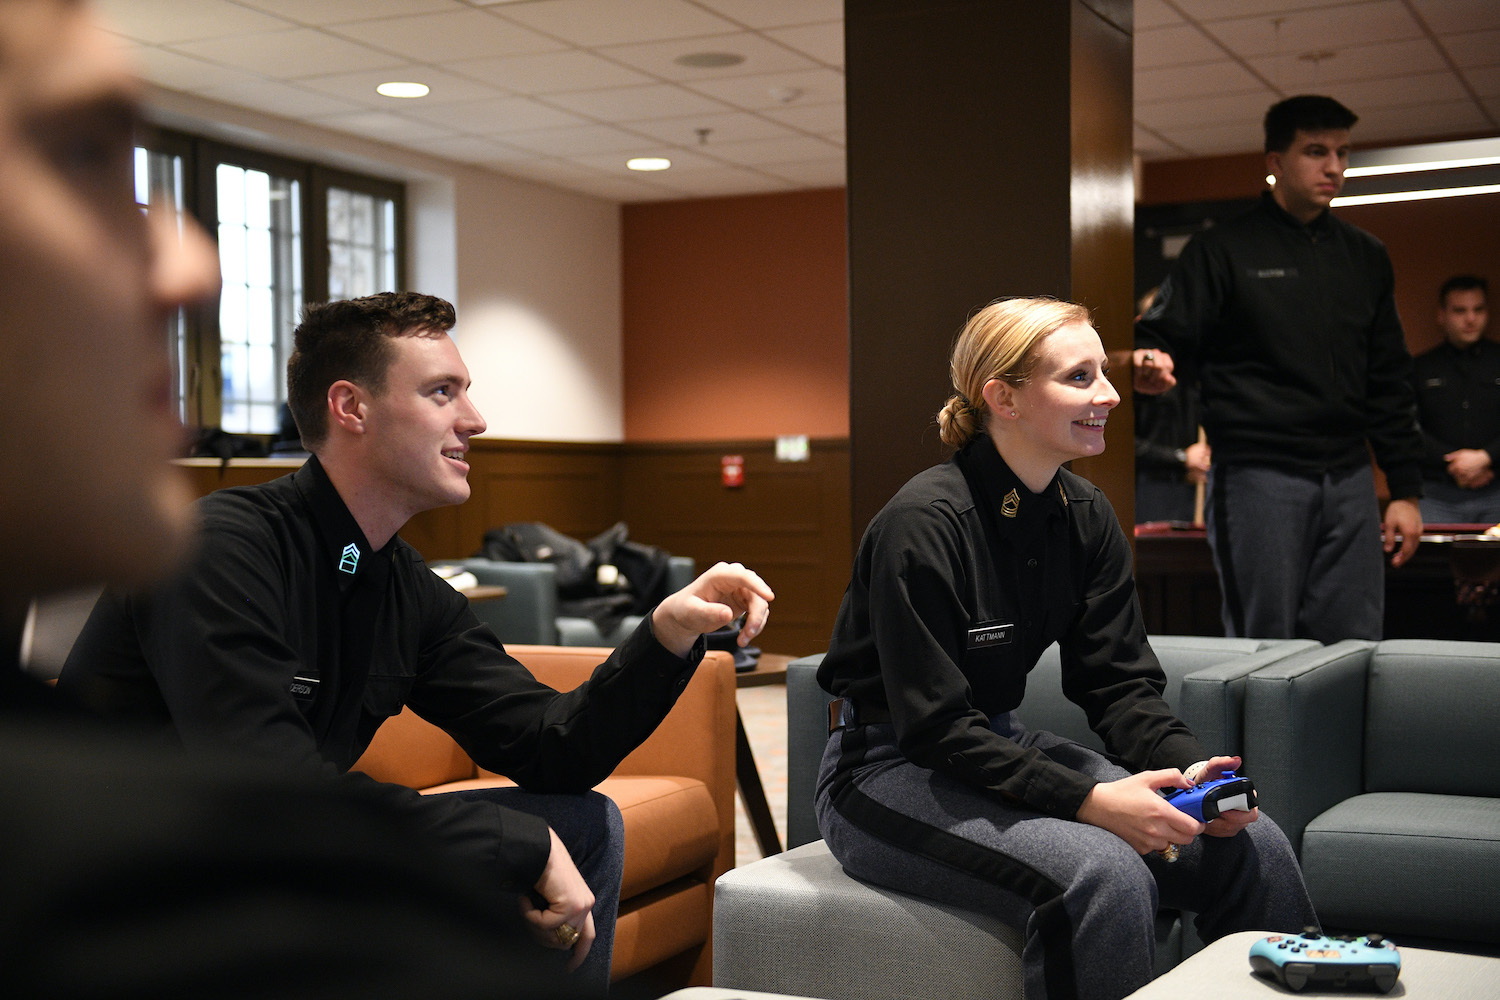 The new cadet activity center located on the ground floor of Crozet Hall has been dubbed “The Arsenal,” is for their use to relax, socialize, and enjoy televised events.